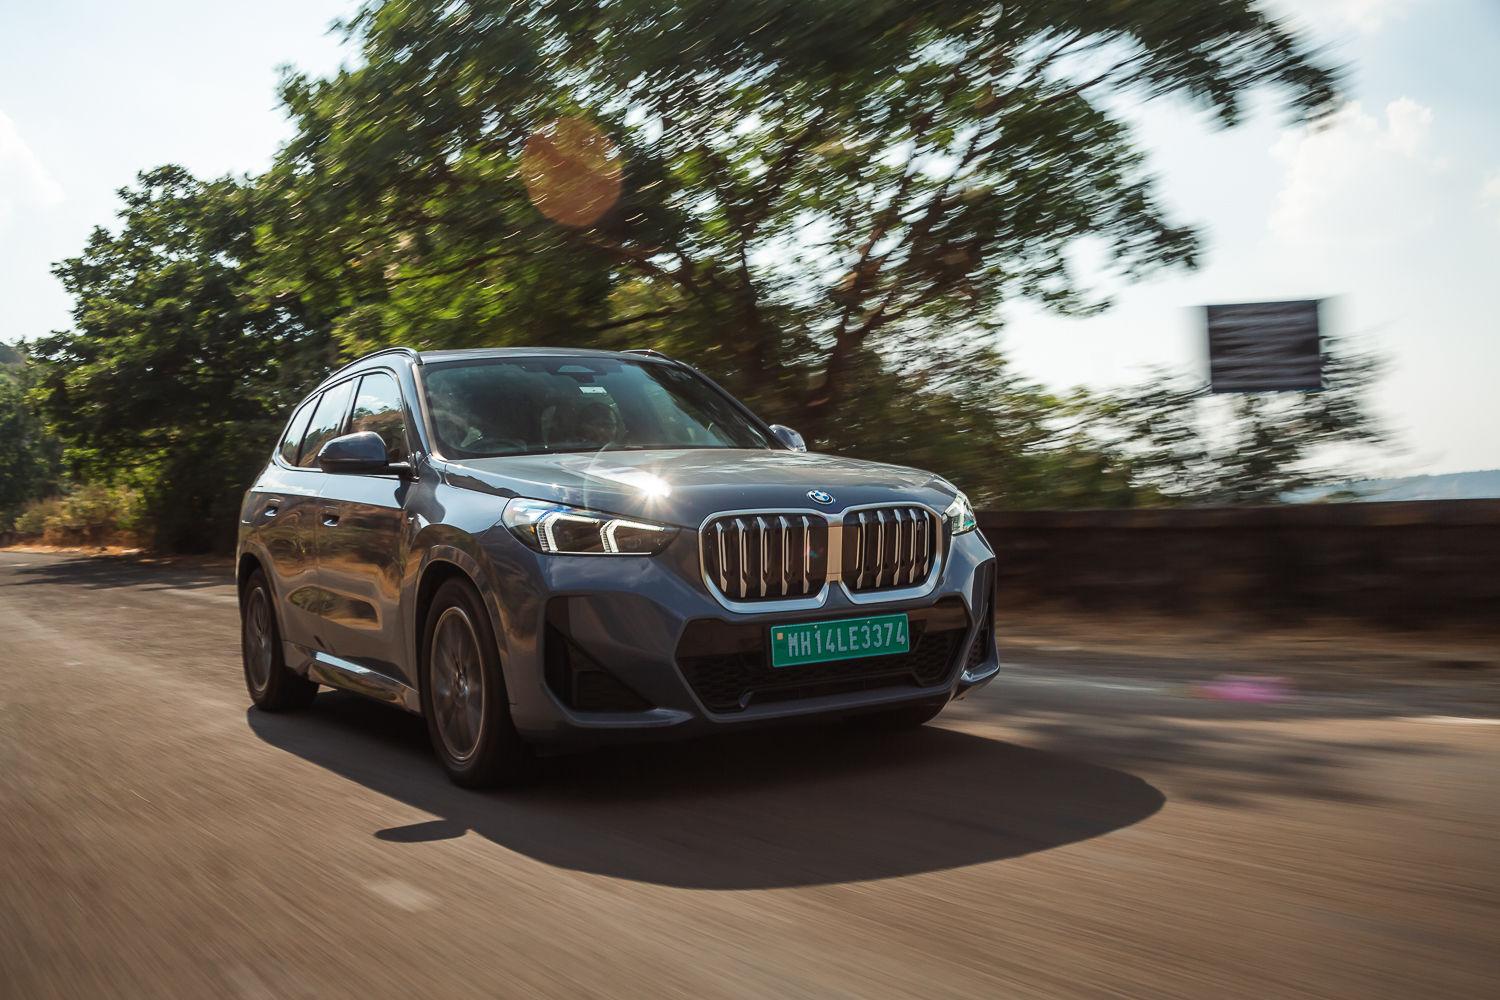 BMW iX1 Electric SUV: First Drive Review